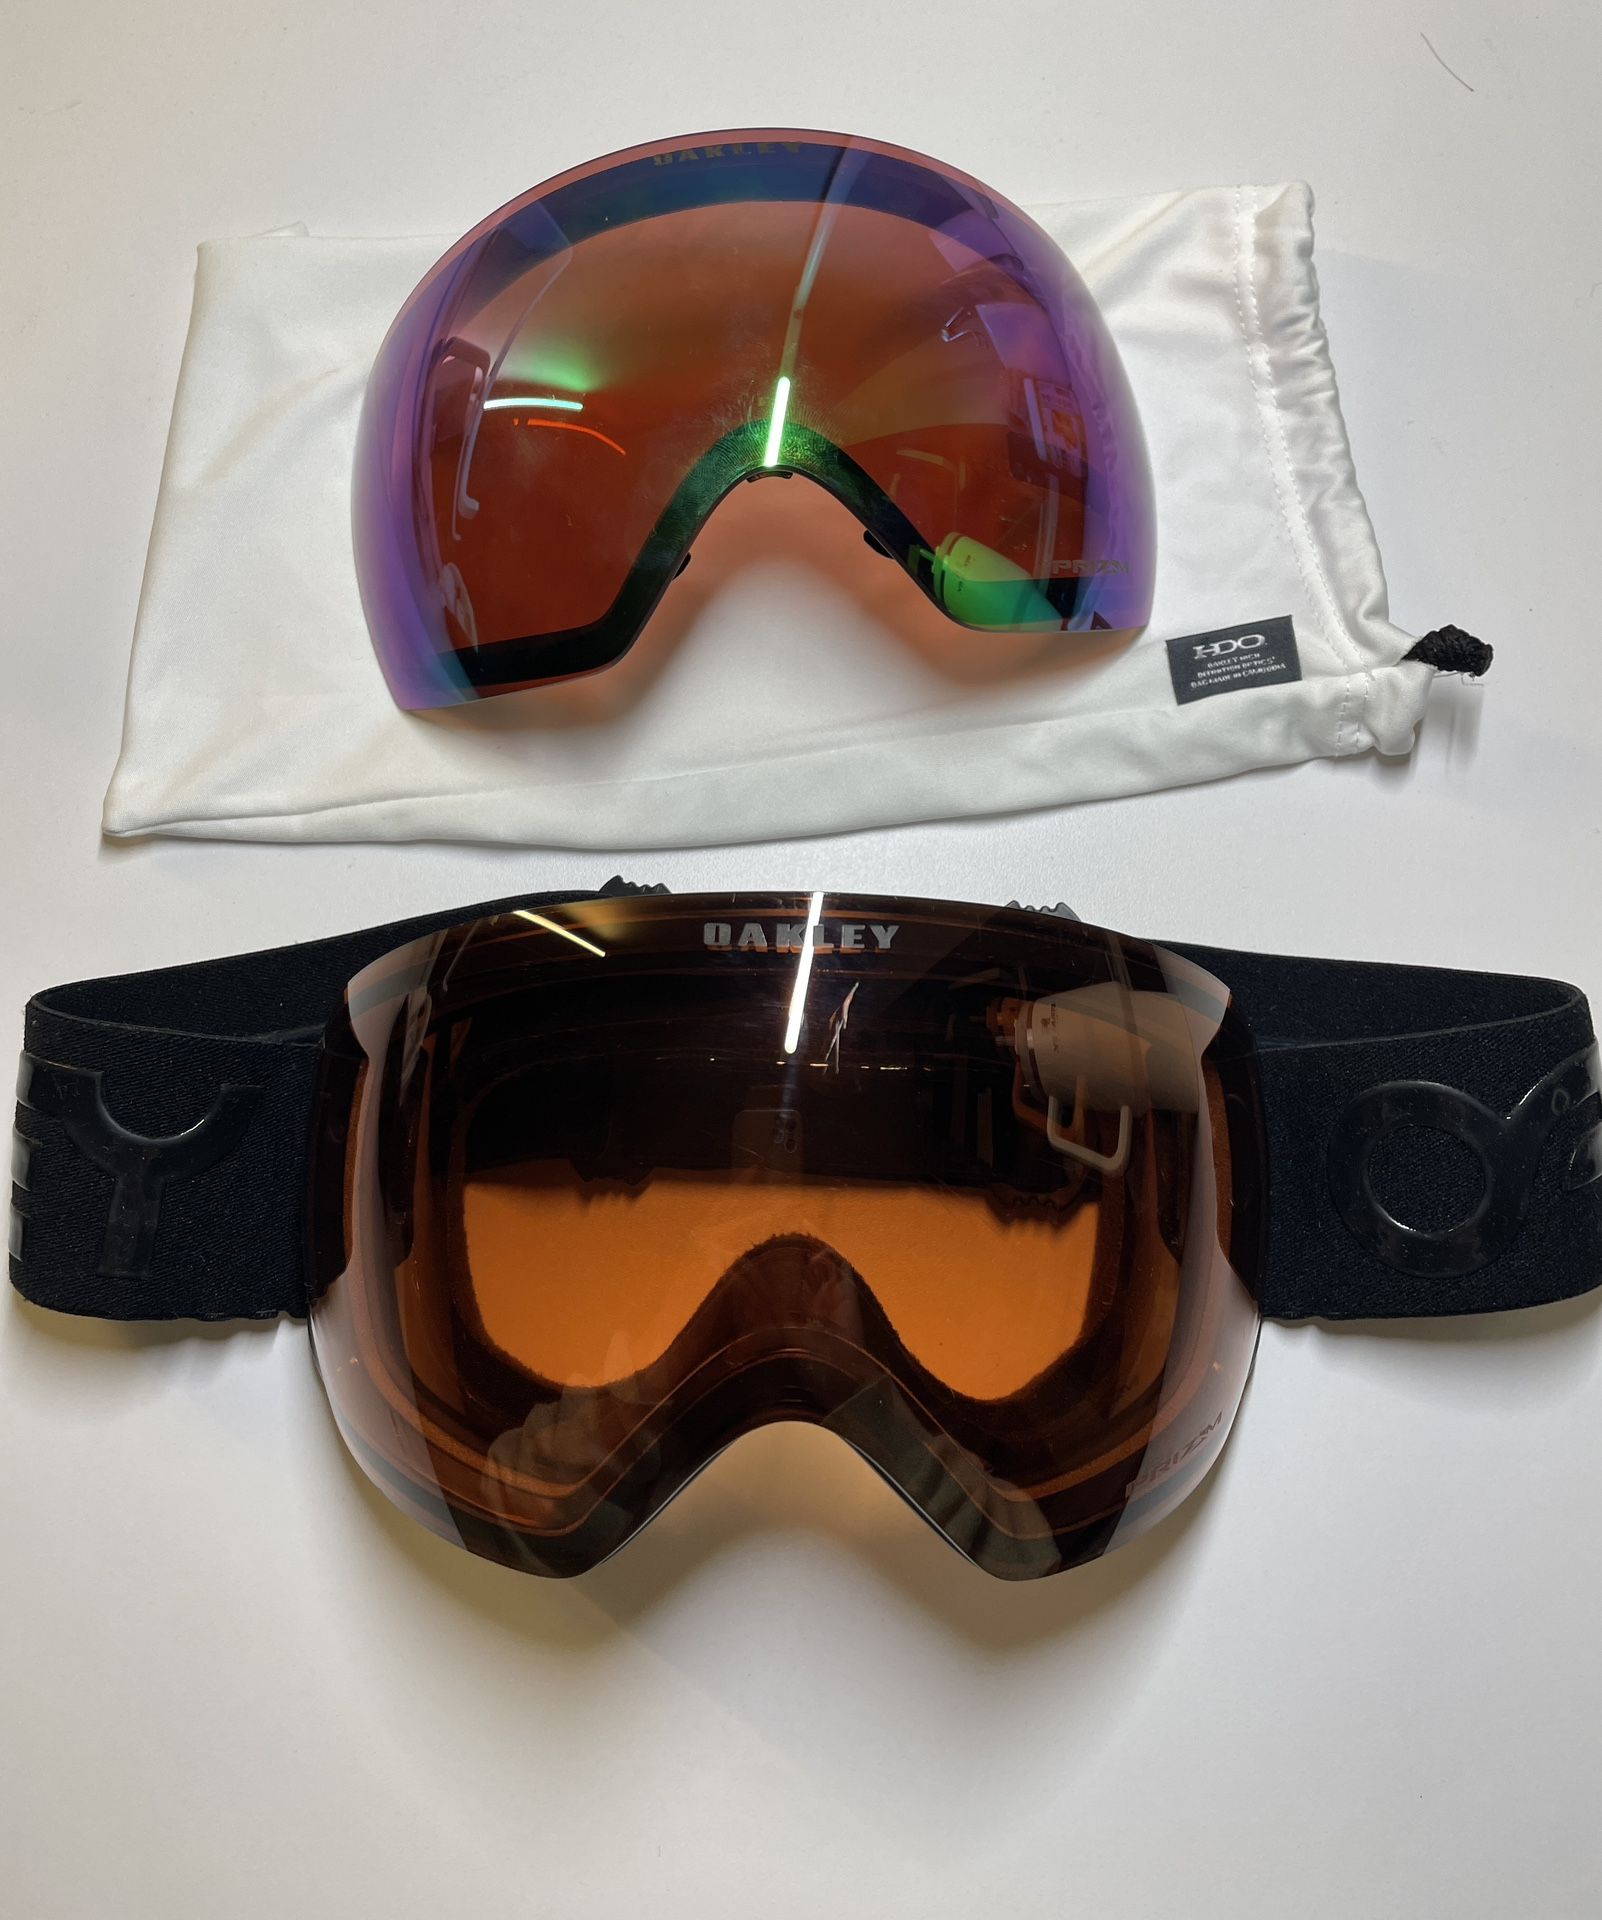 Oakley Flight Deck Pilot Goggles with two lenses